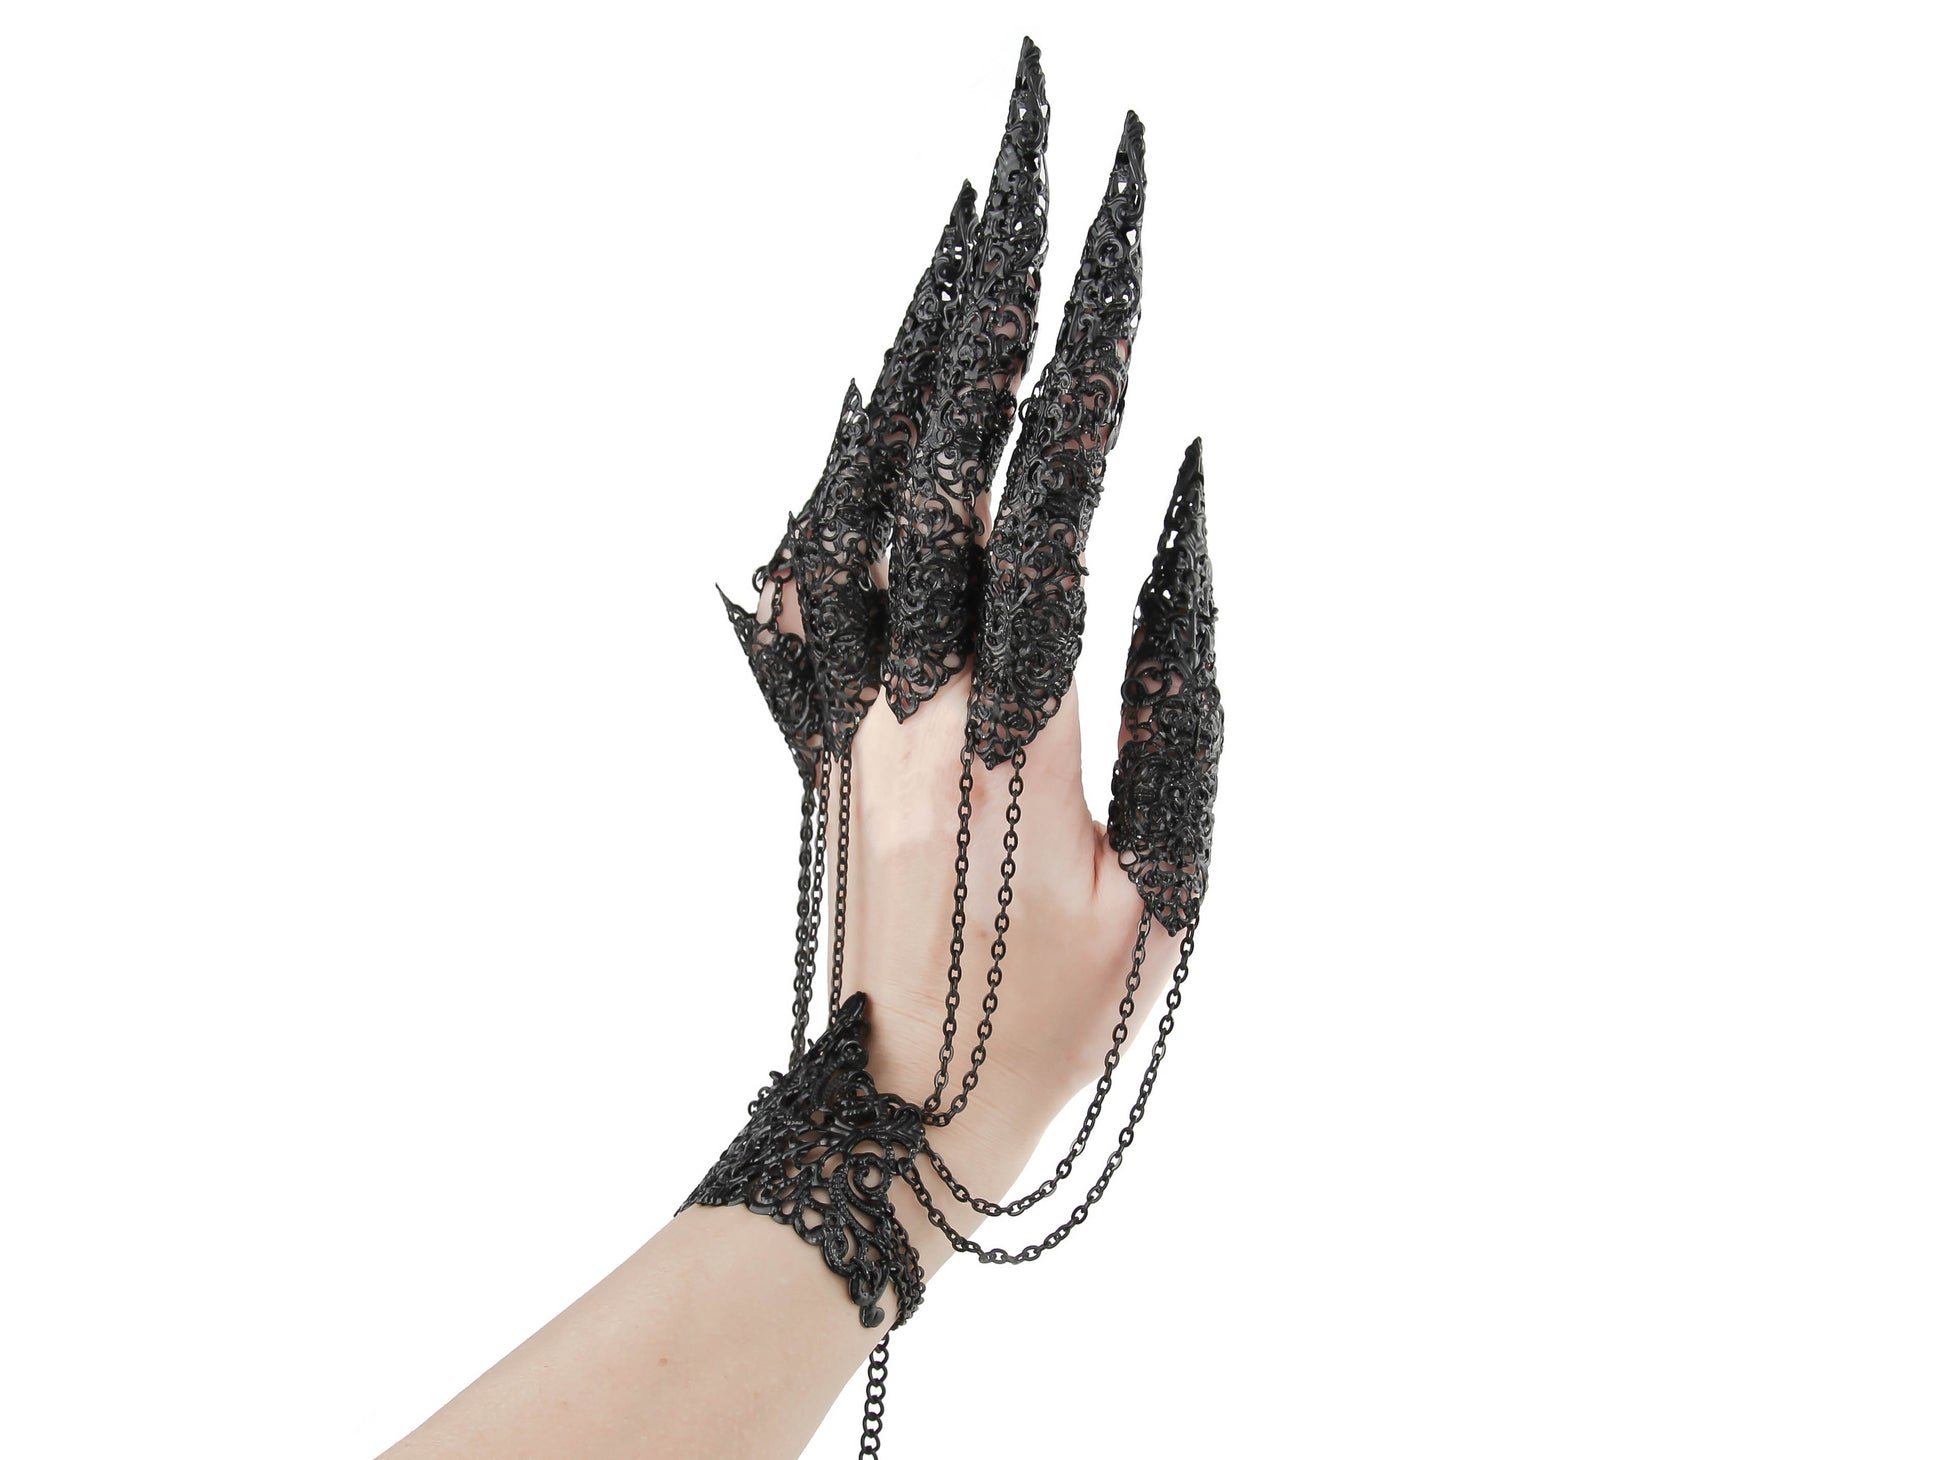 This striking black metal glove with full finger claw rings by Myril Jewels exemplifies gothic opulence. Perfect for a dramatic Halloween or punk ensemble, its intricate design is ideal for those who embrace a bold, neo-gothic style, from festival outfits to drag queen glamour, or as a standout gift for the darkly inclined